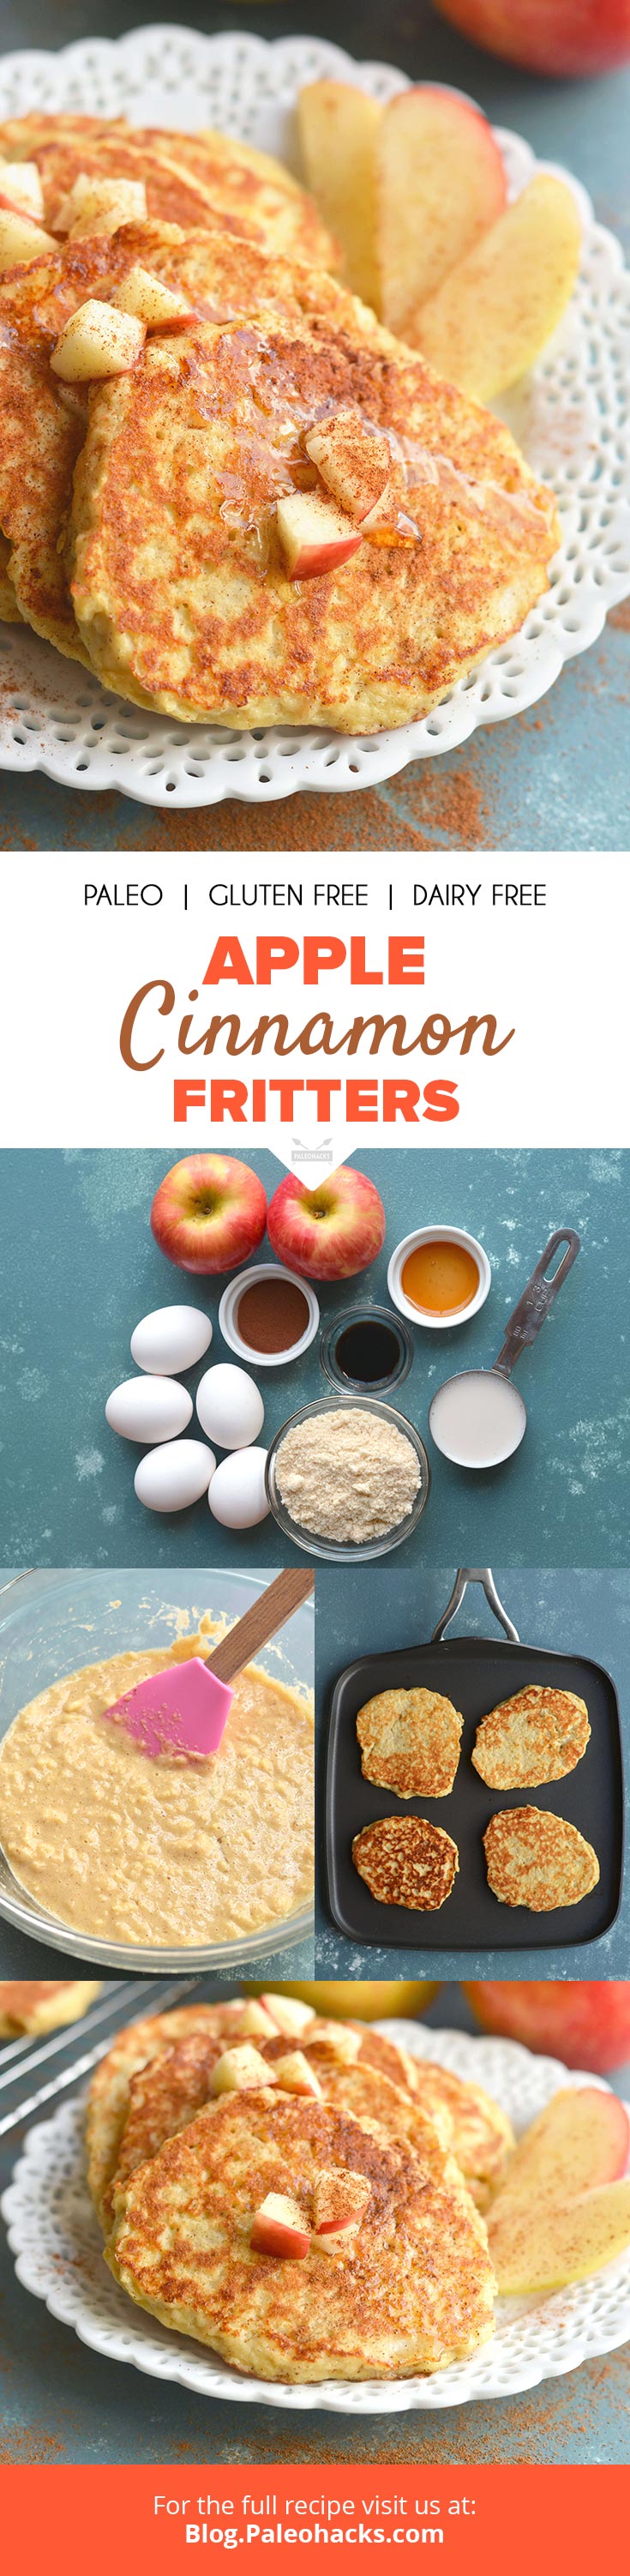 Fluffy apple cinnamon fritters are fried in coconut oil for a golden brown crust! These apple cinnamon fritters are great for meal prep.